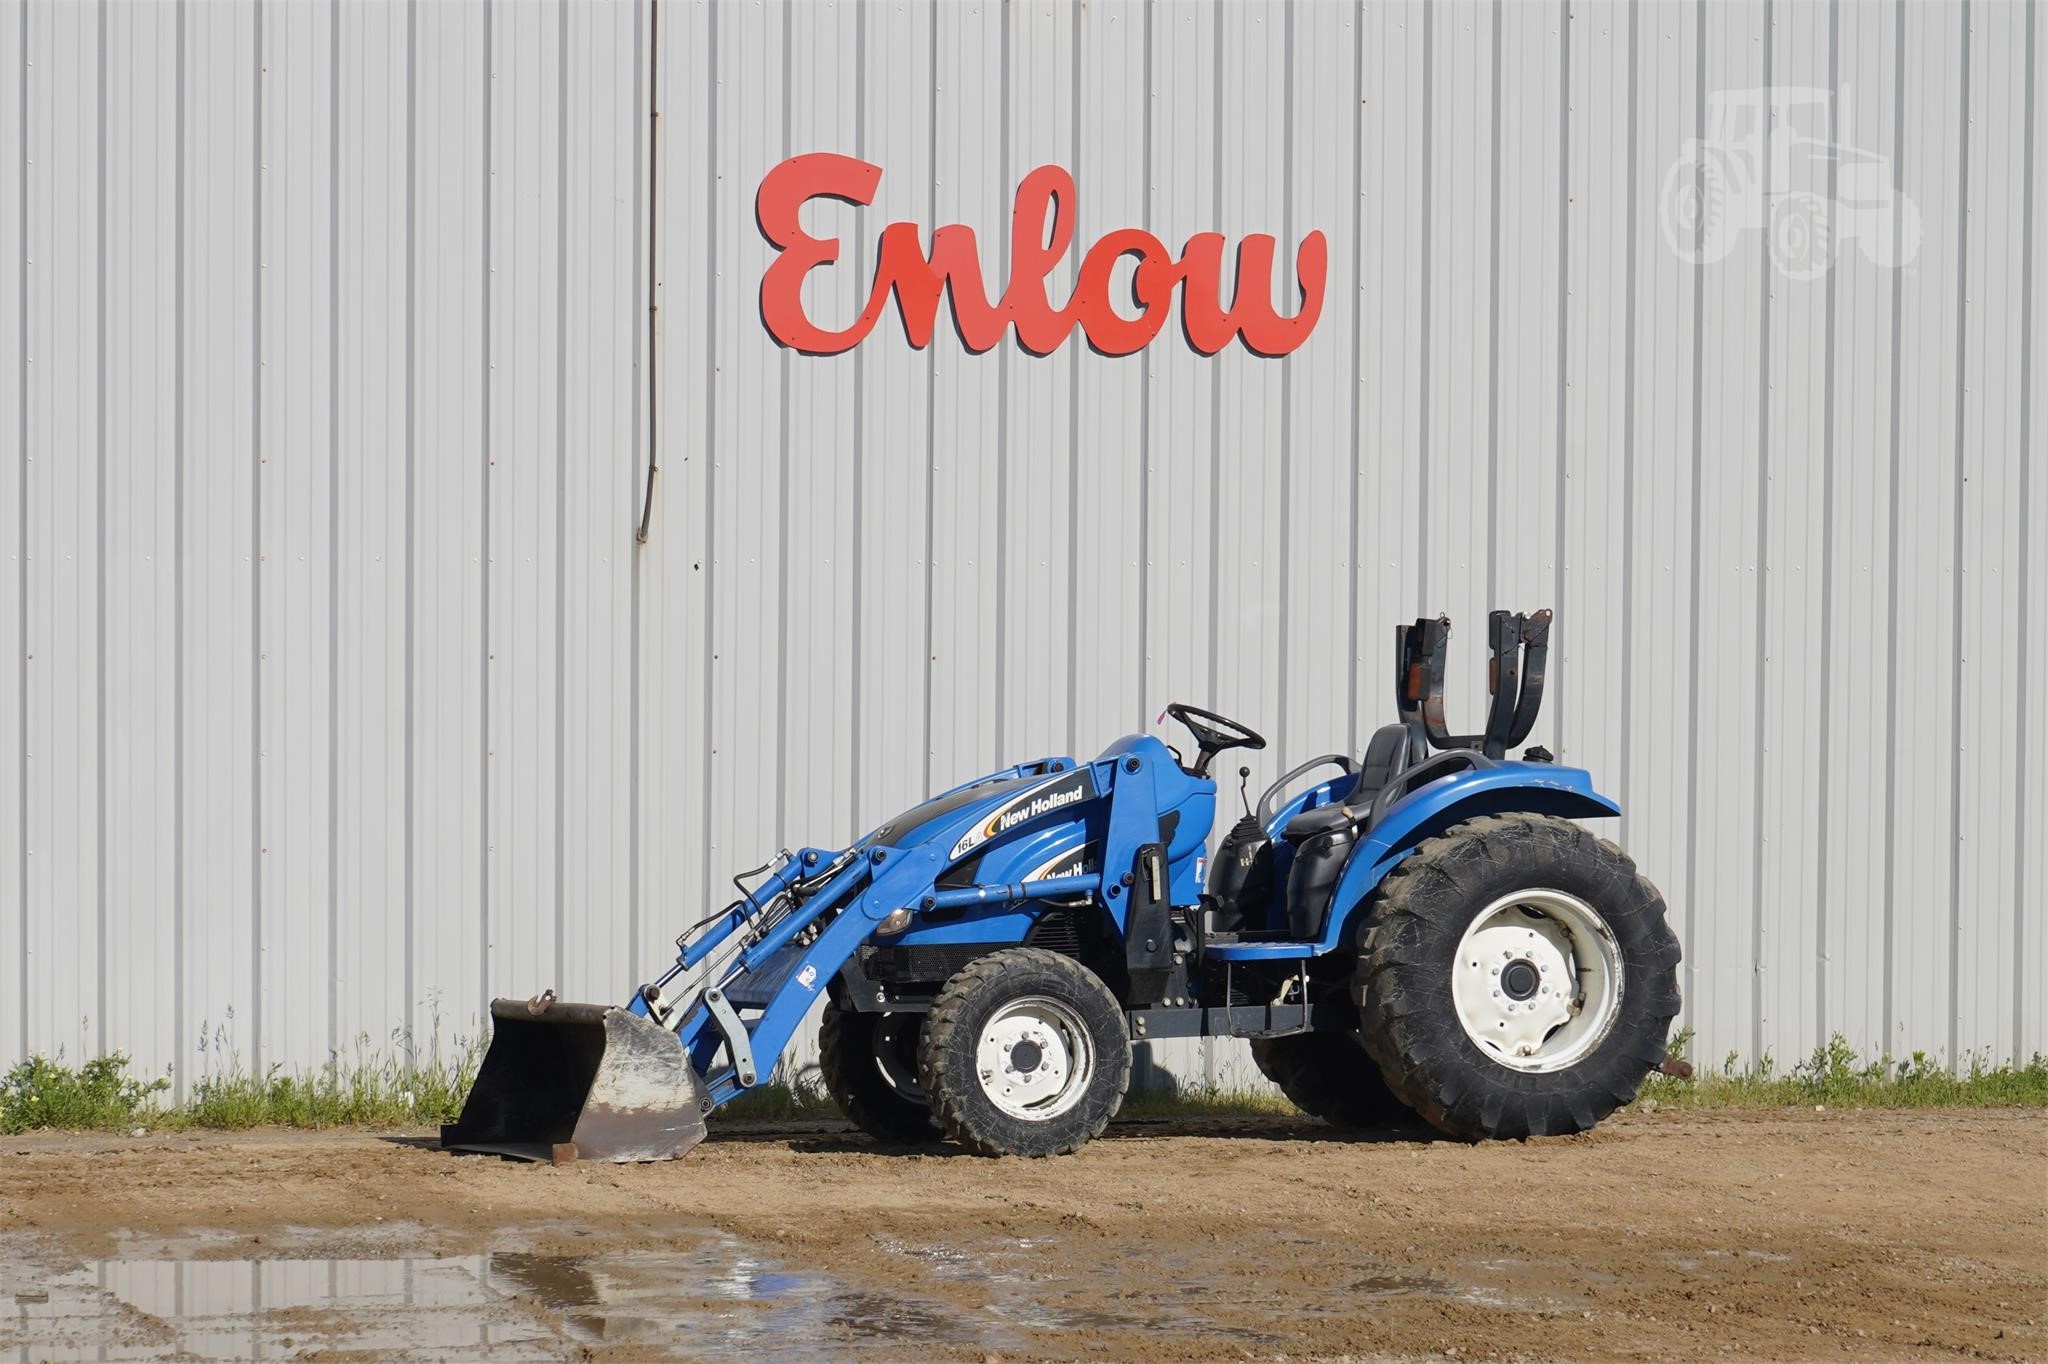 Less Than 40 Hp Tractors For Sale In Tulsa Oklahoma 166 Listings Tractorhouse Com Page 1 Of 7